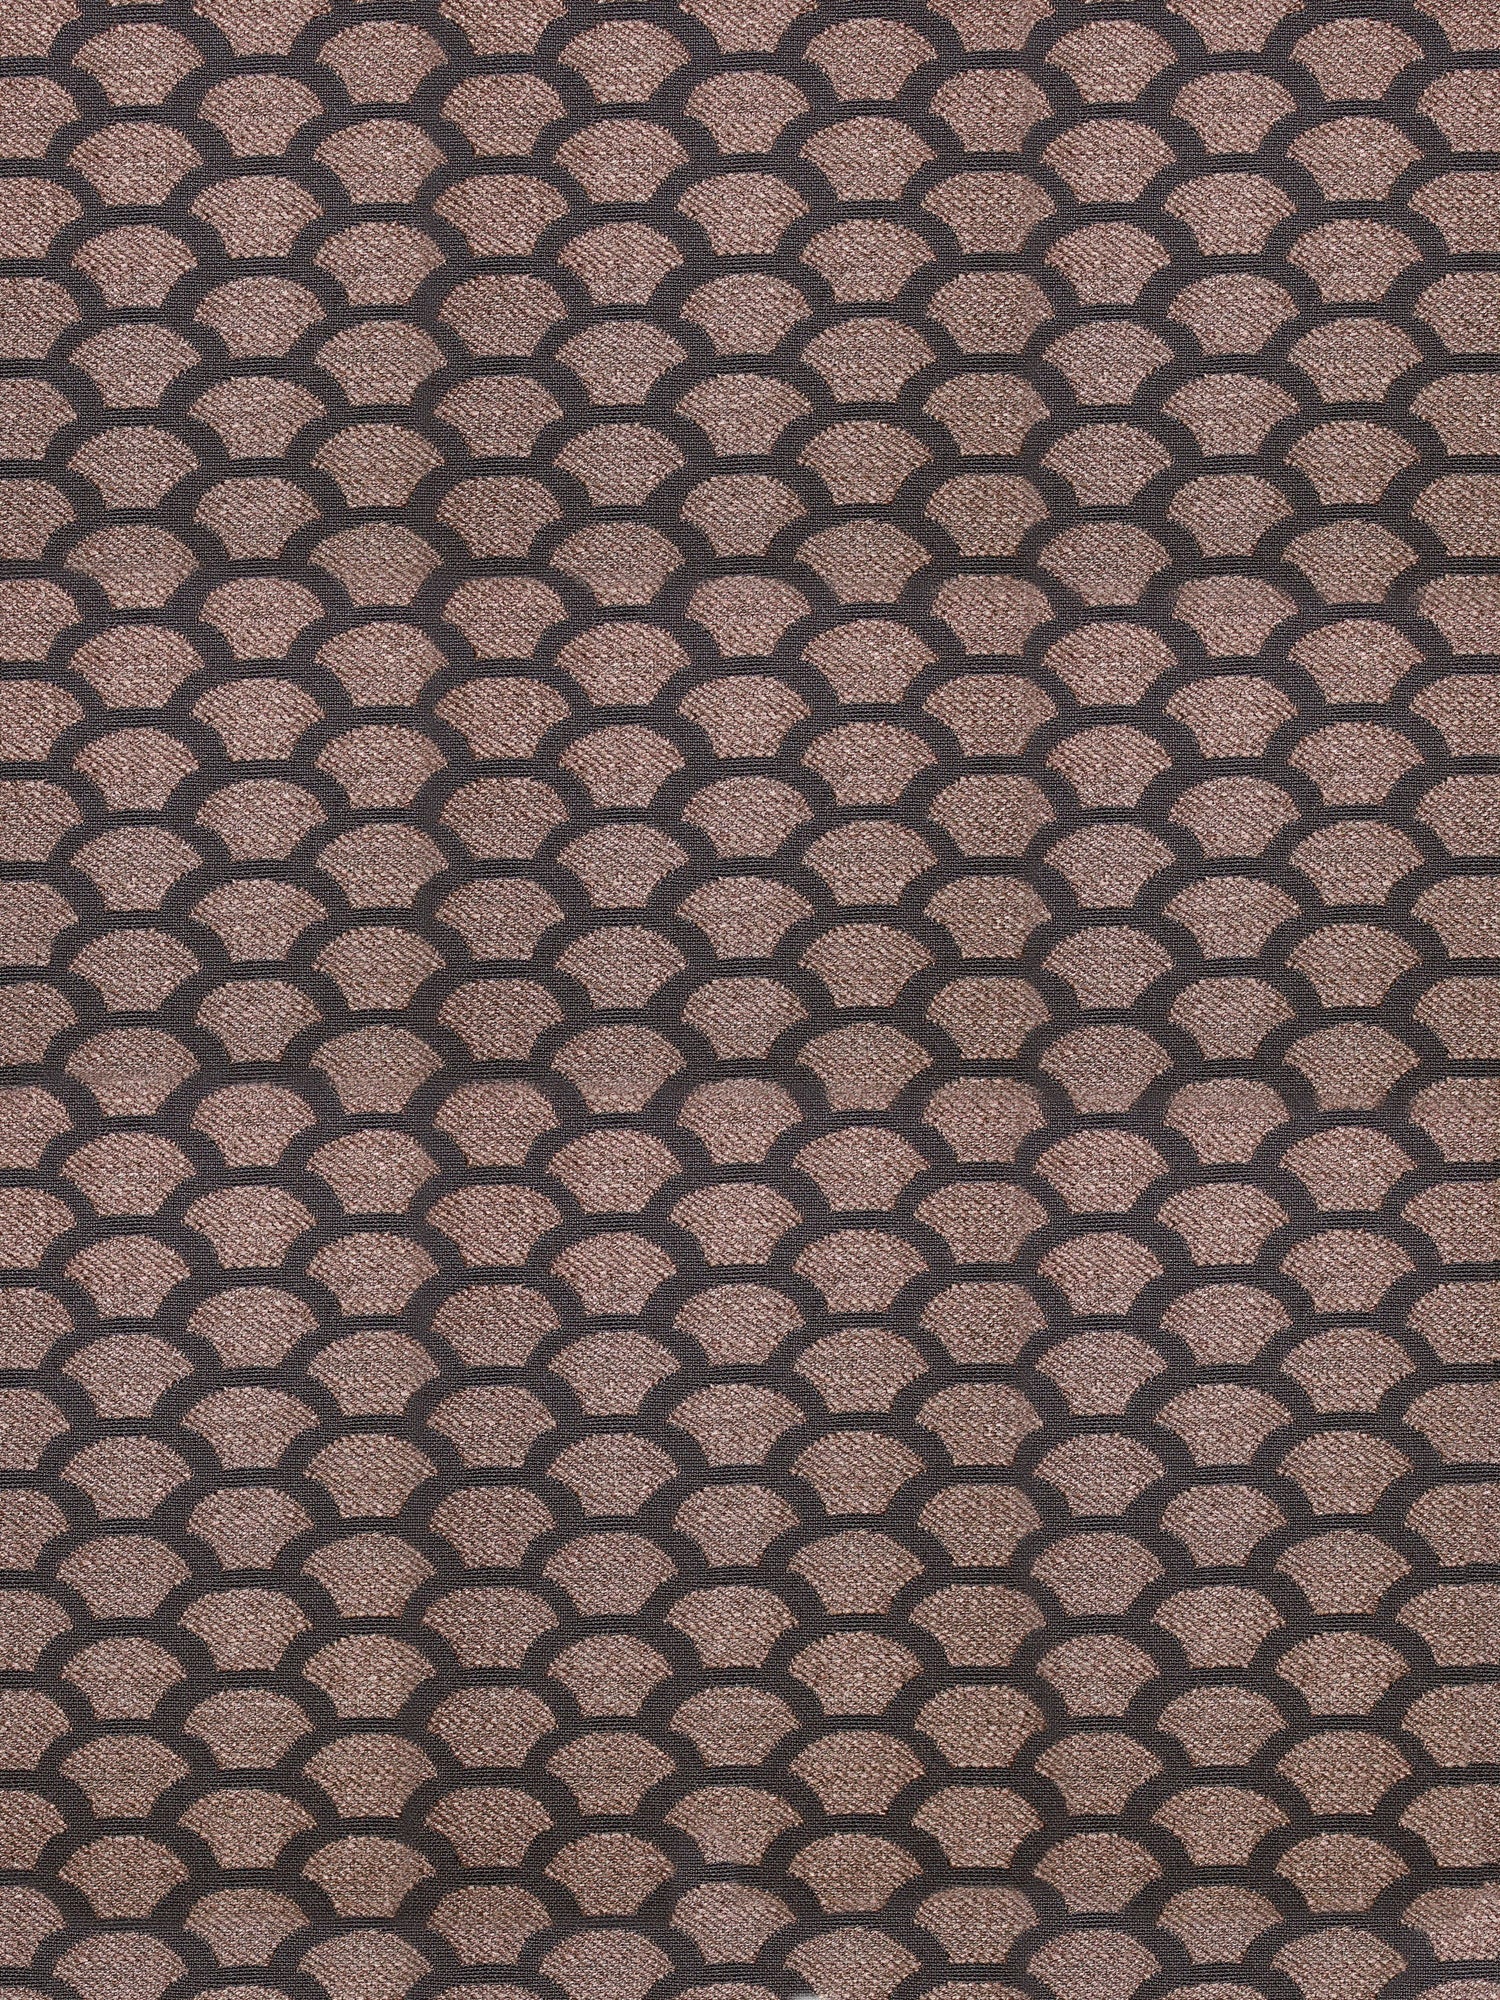 Poseidon fabric in espresso color - pattern number SC 000226972 - by Scalamandre in the Scalamandre Fabrics Book 1 collection